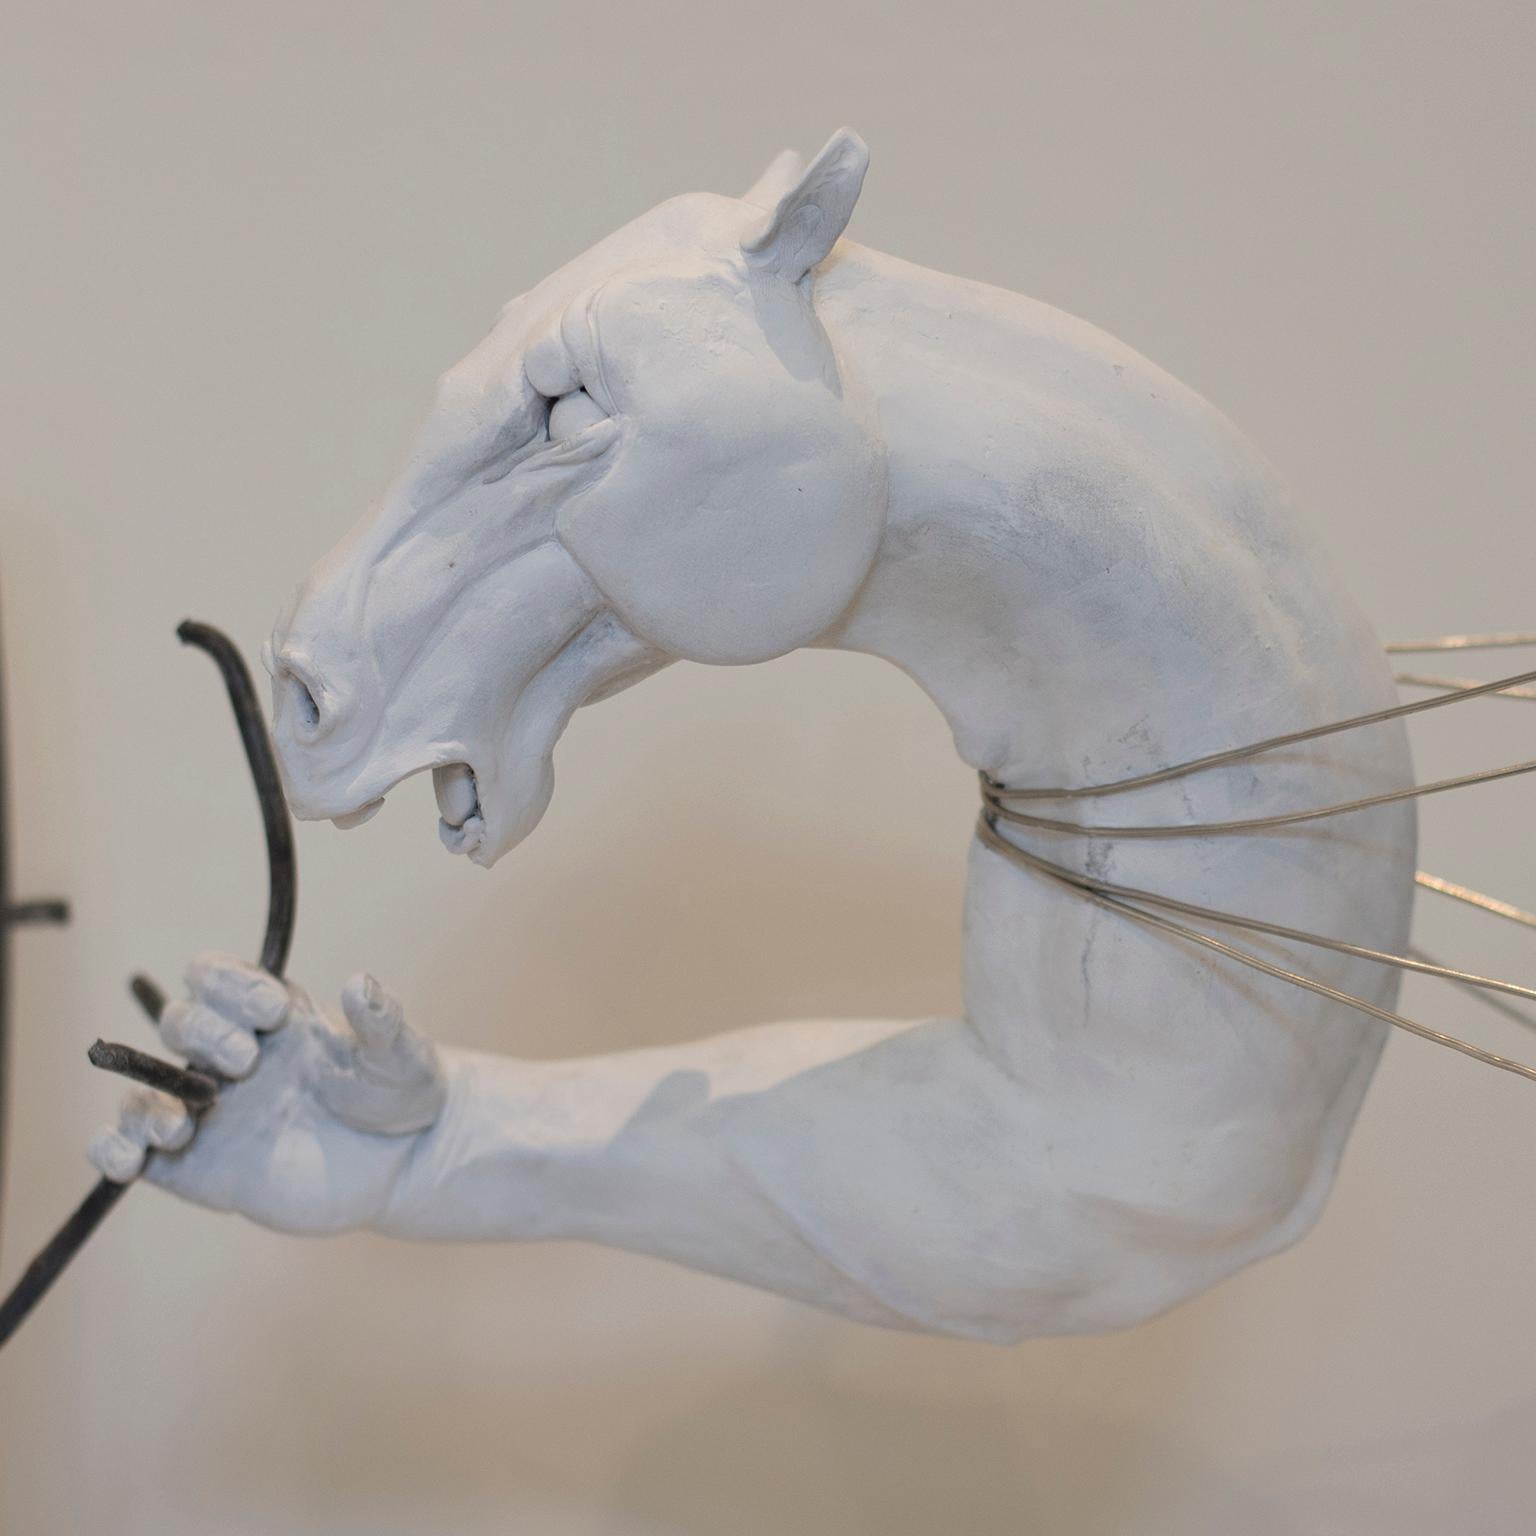 Time by Hobbes Vincent is an original steel and white epoxy plaster sculpture. 
11.5 x 18.5 x 11.5 in

This surrealism sculpture often invokes the though to raw horse power. 

Hobbes first began sculpting as a small child, making his own toys out of